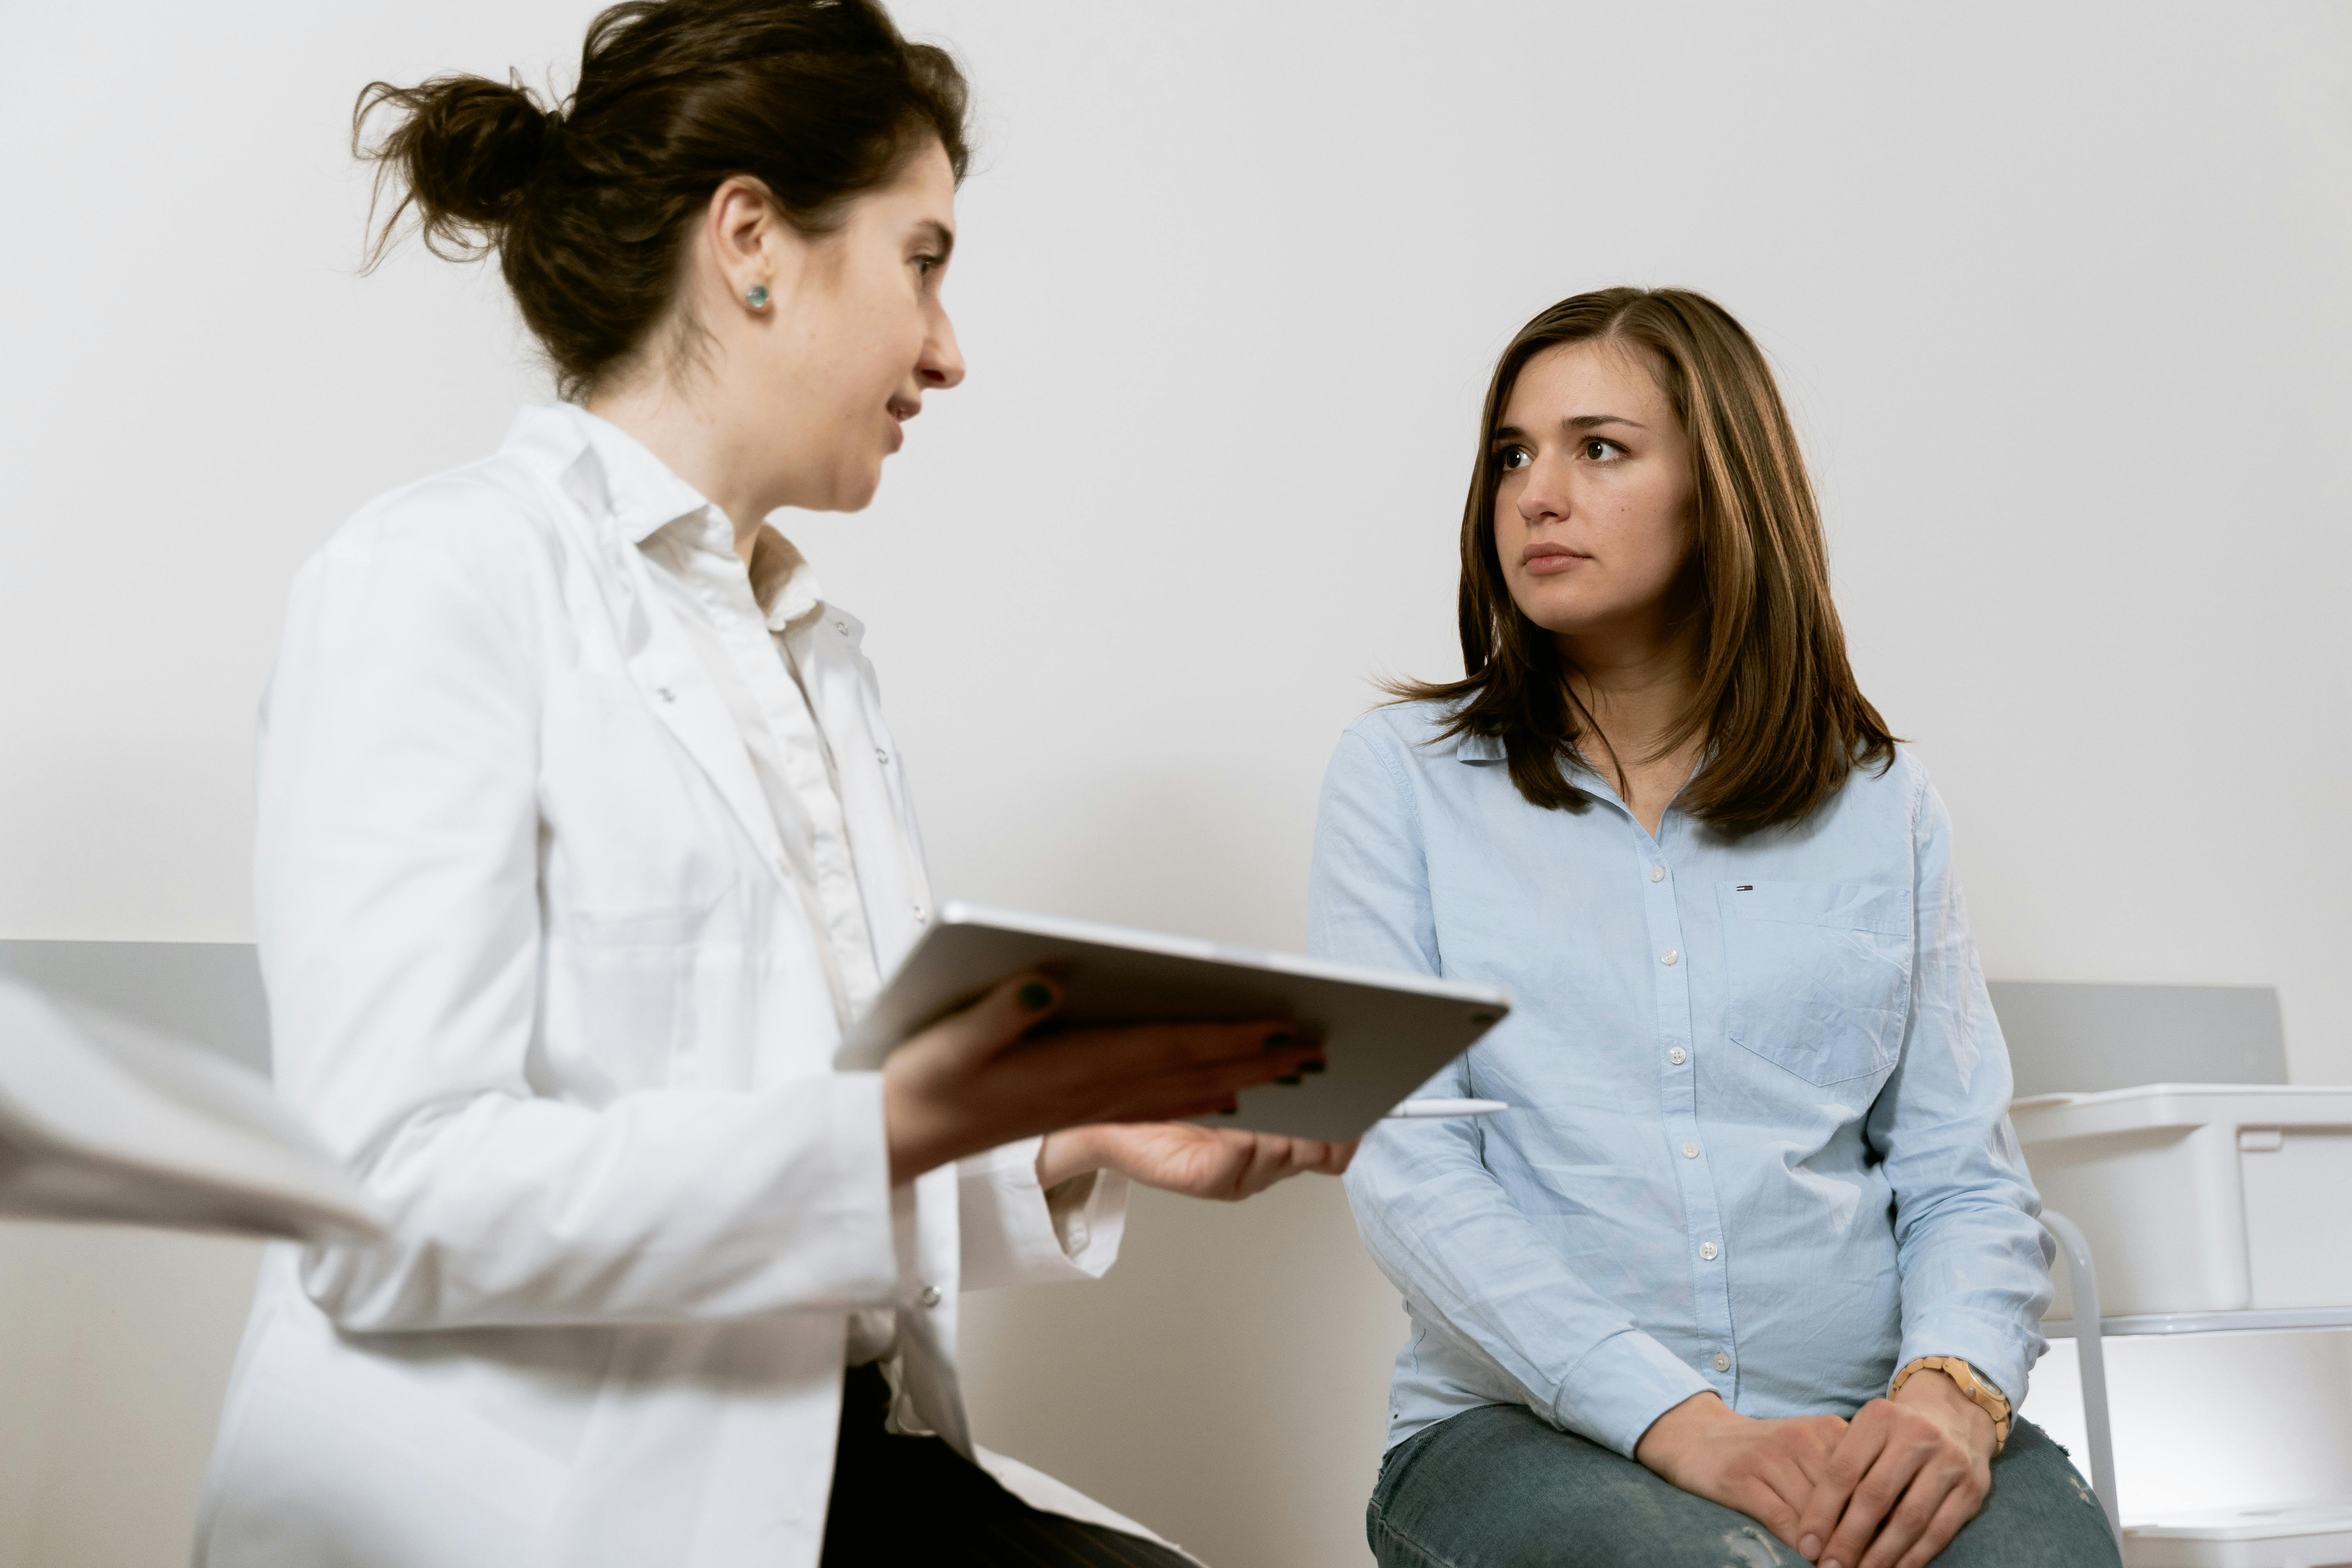 A woman getting bad news from her doctor | Source: Pexels